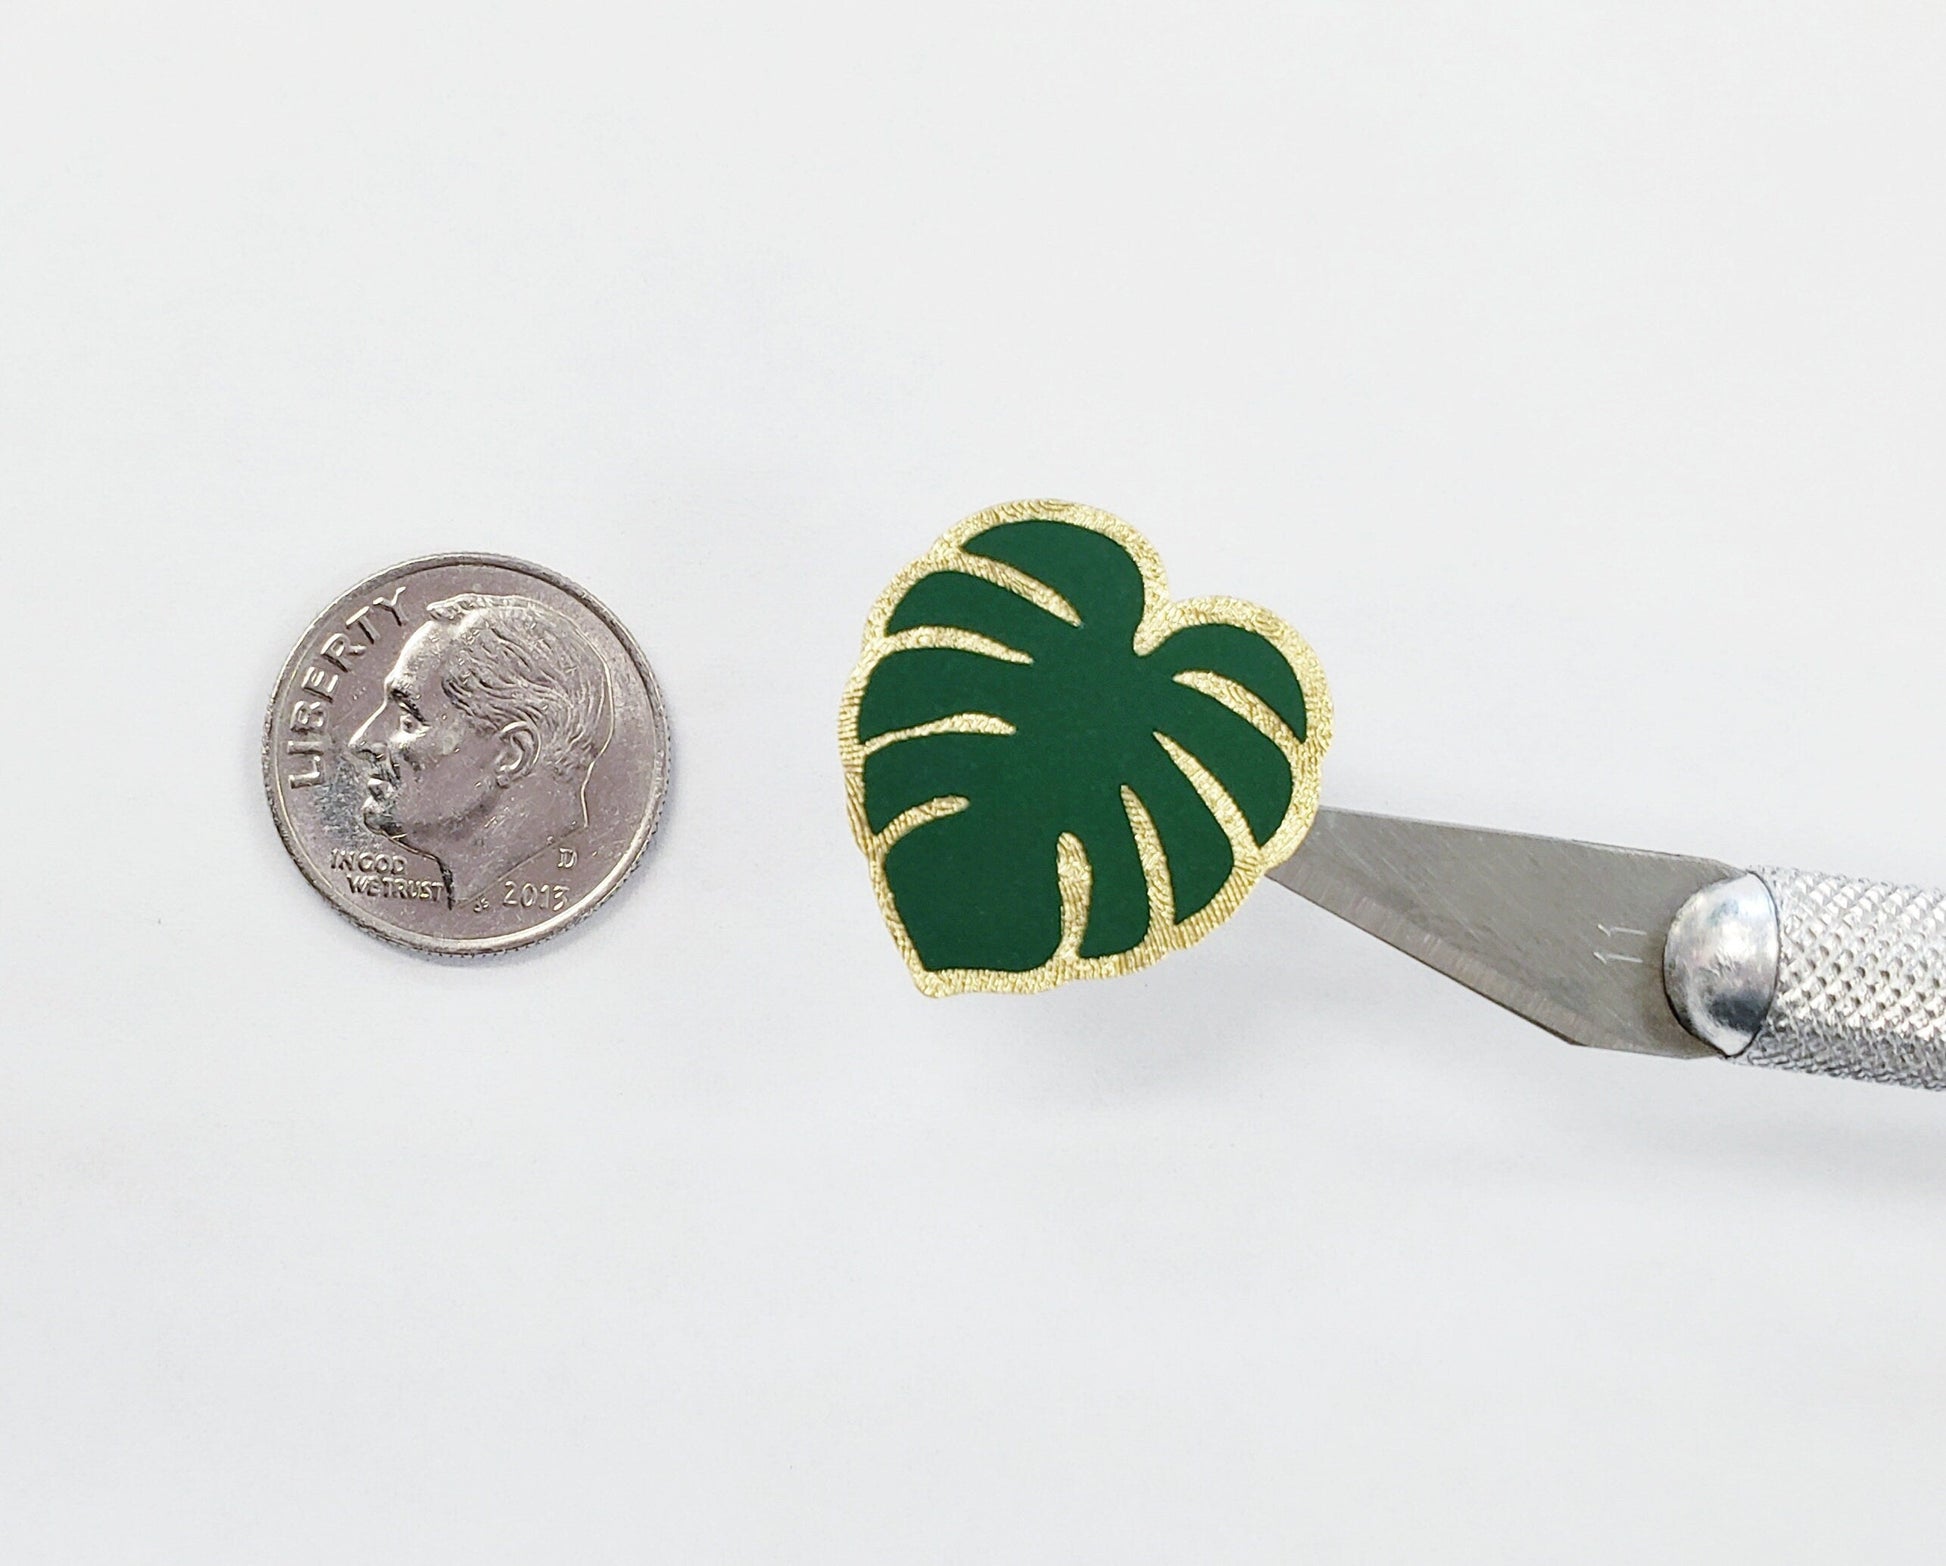 Monstera Leaf Stickers, set of 25, 50 or 100 emerald green and gold metallic tropical leaf stickers for envelopes, note cards and weddings